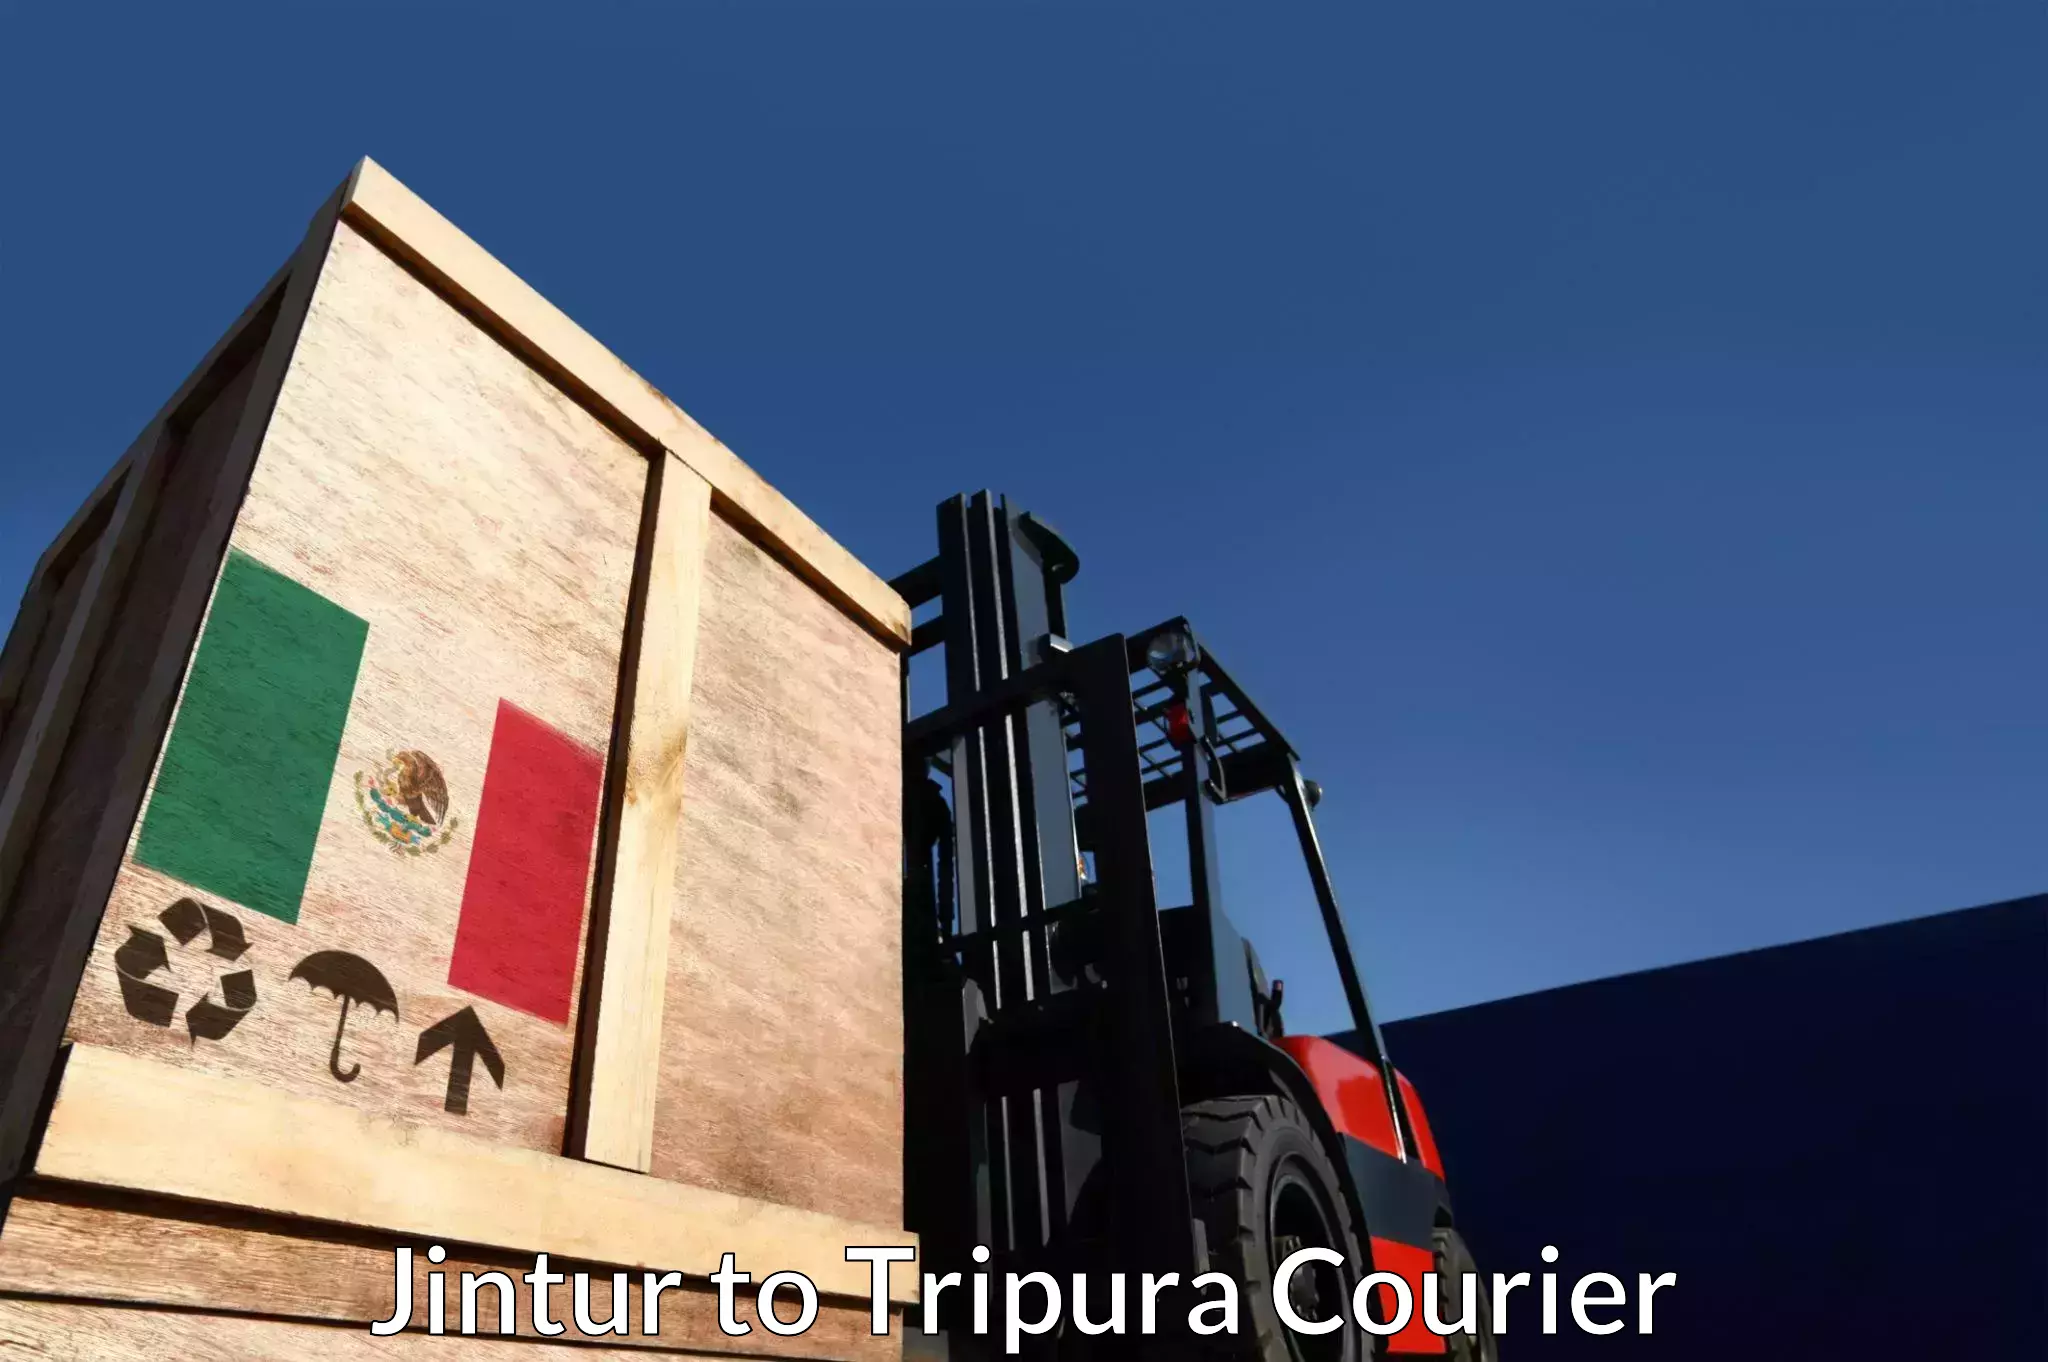 Efficient shipping operations in Jintur to Udaipur Tripura